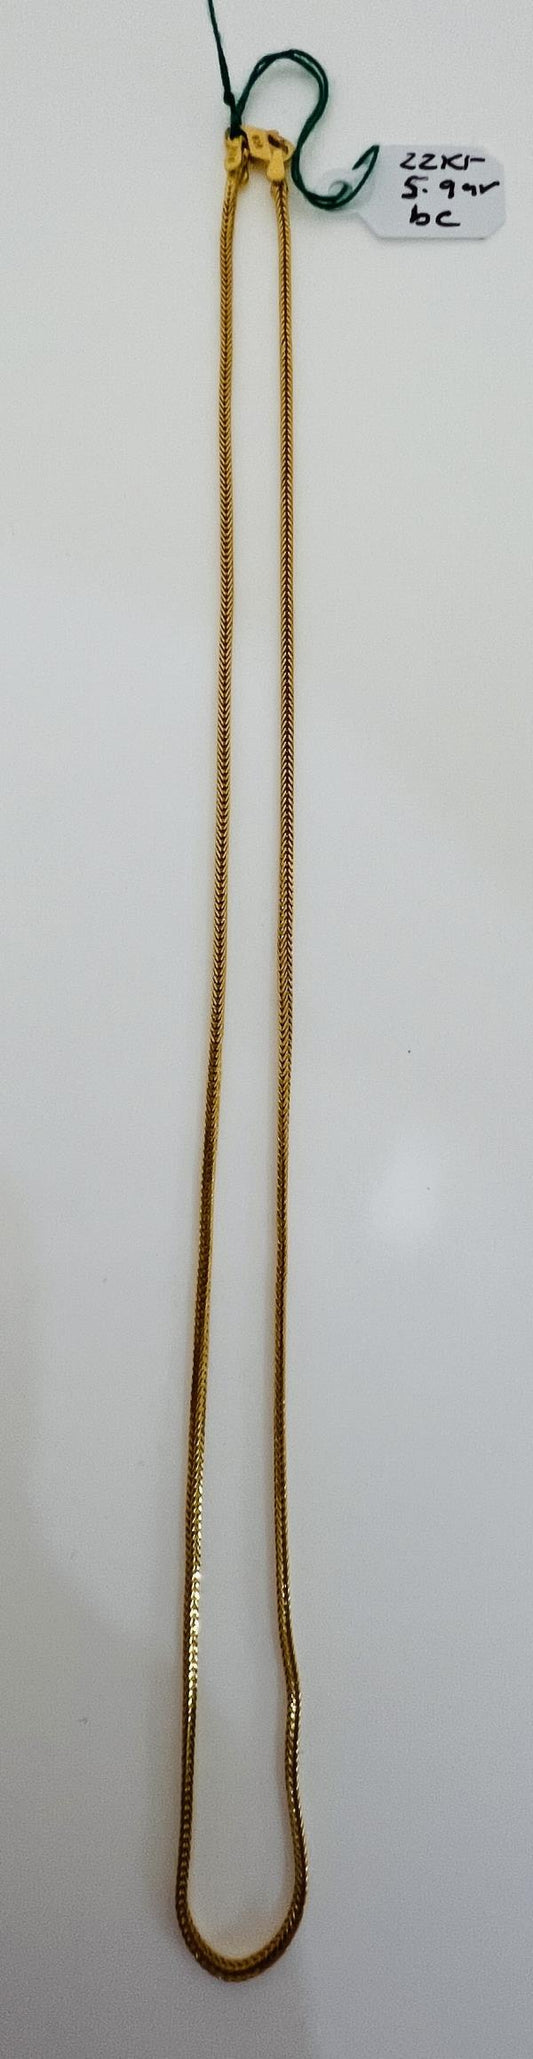 22KT GOLD CHAIN 14" 5.9GM